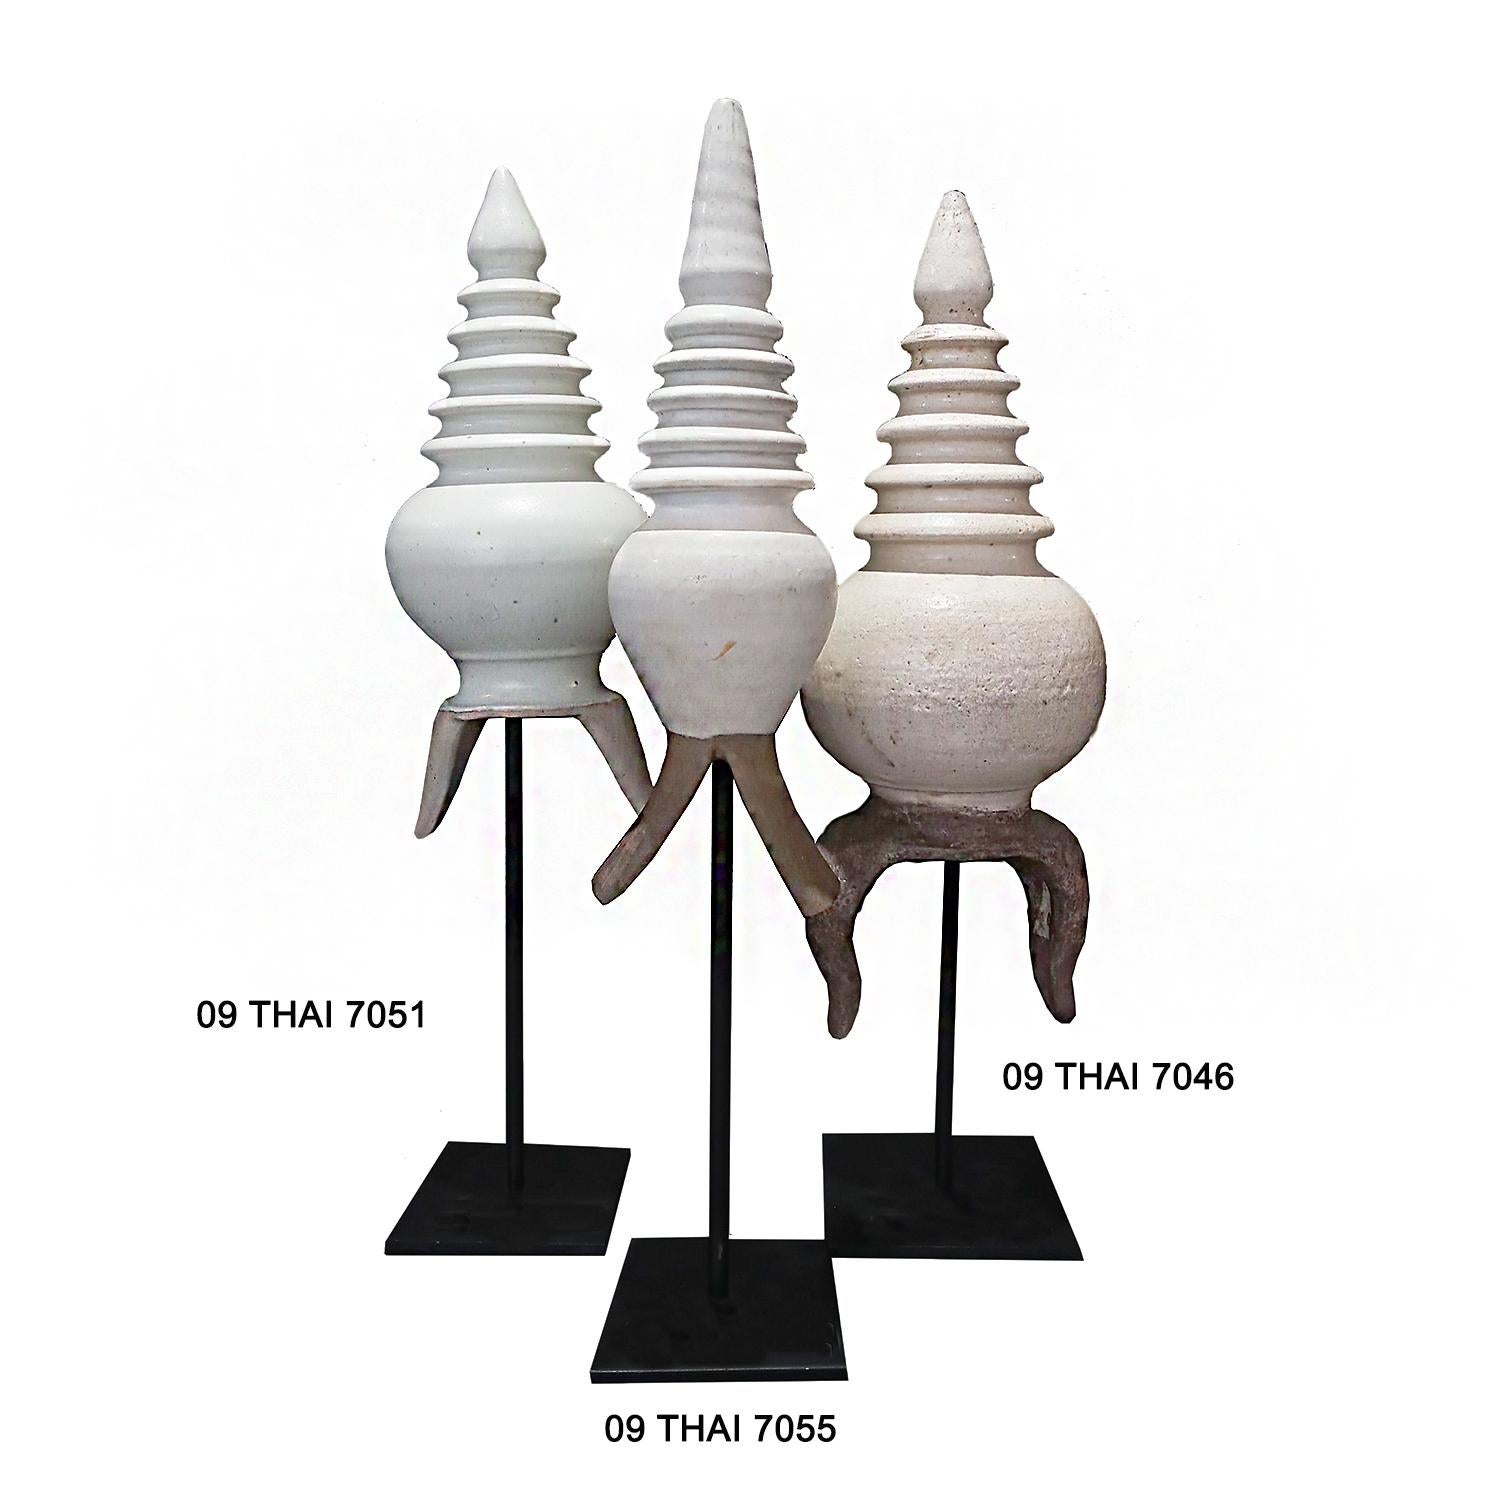 Thai Ceramic Stupa Architectural Details, on Stand For Sale 5